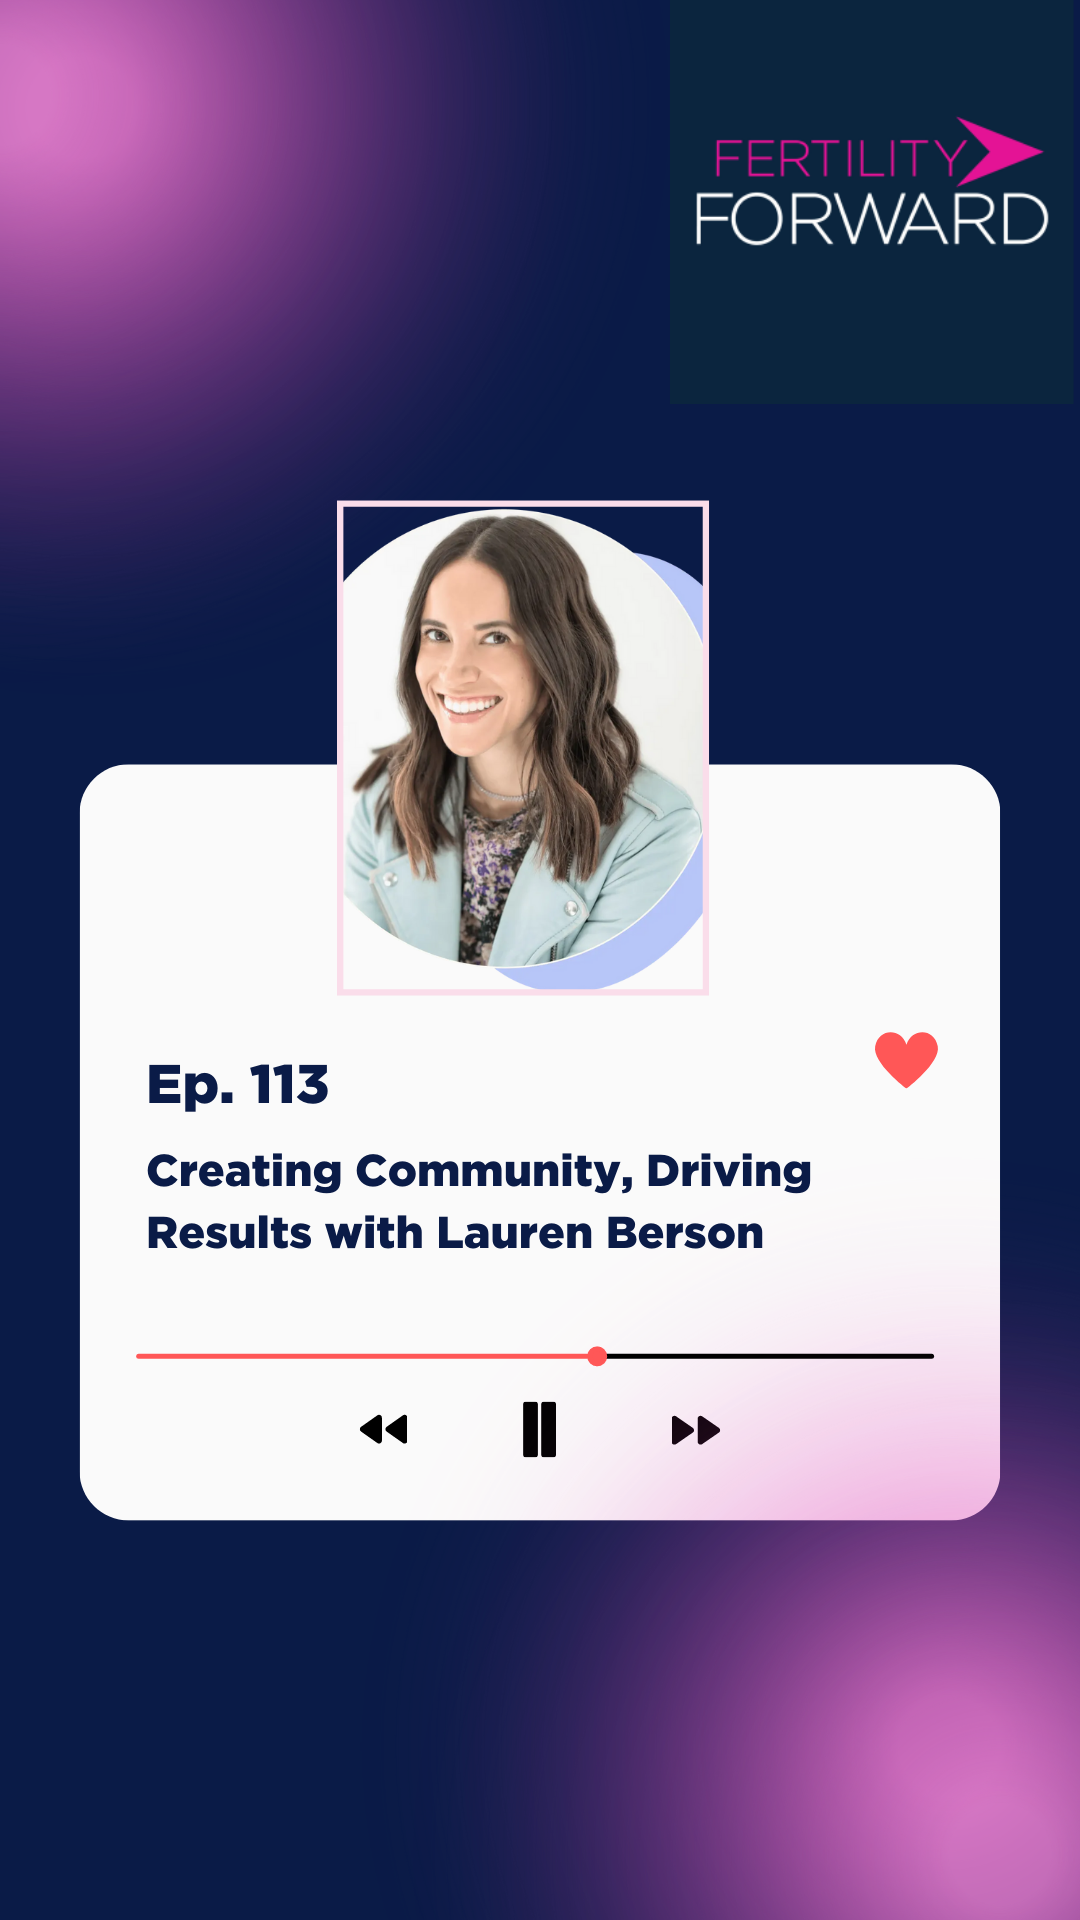 Ep 113: Creating Community, Driving Results with Lauren Berson